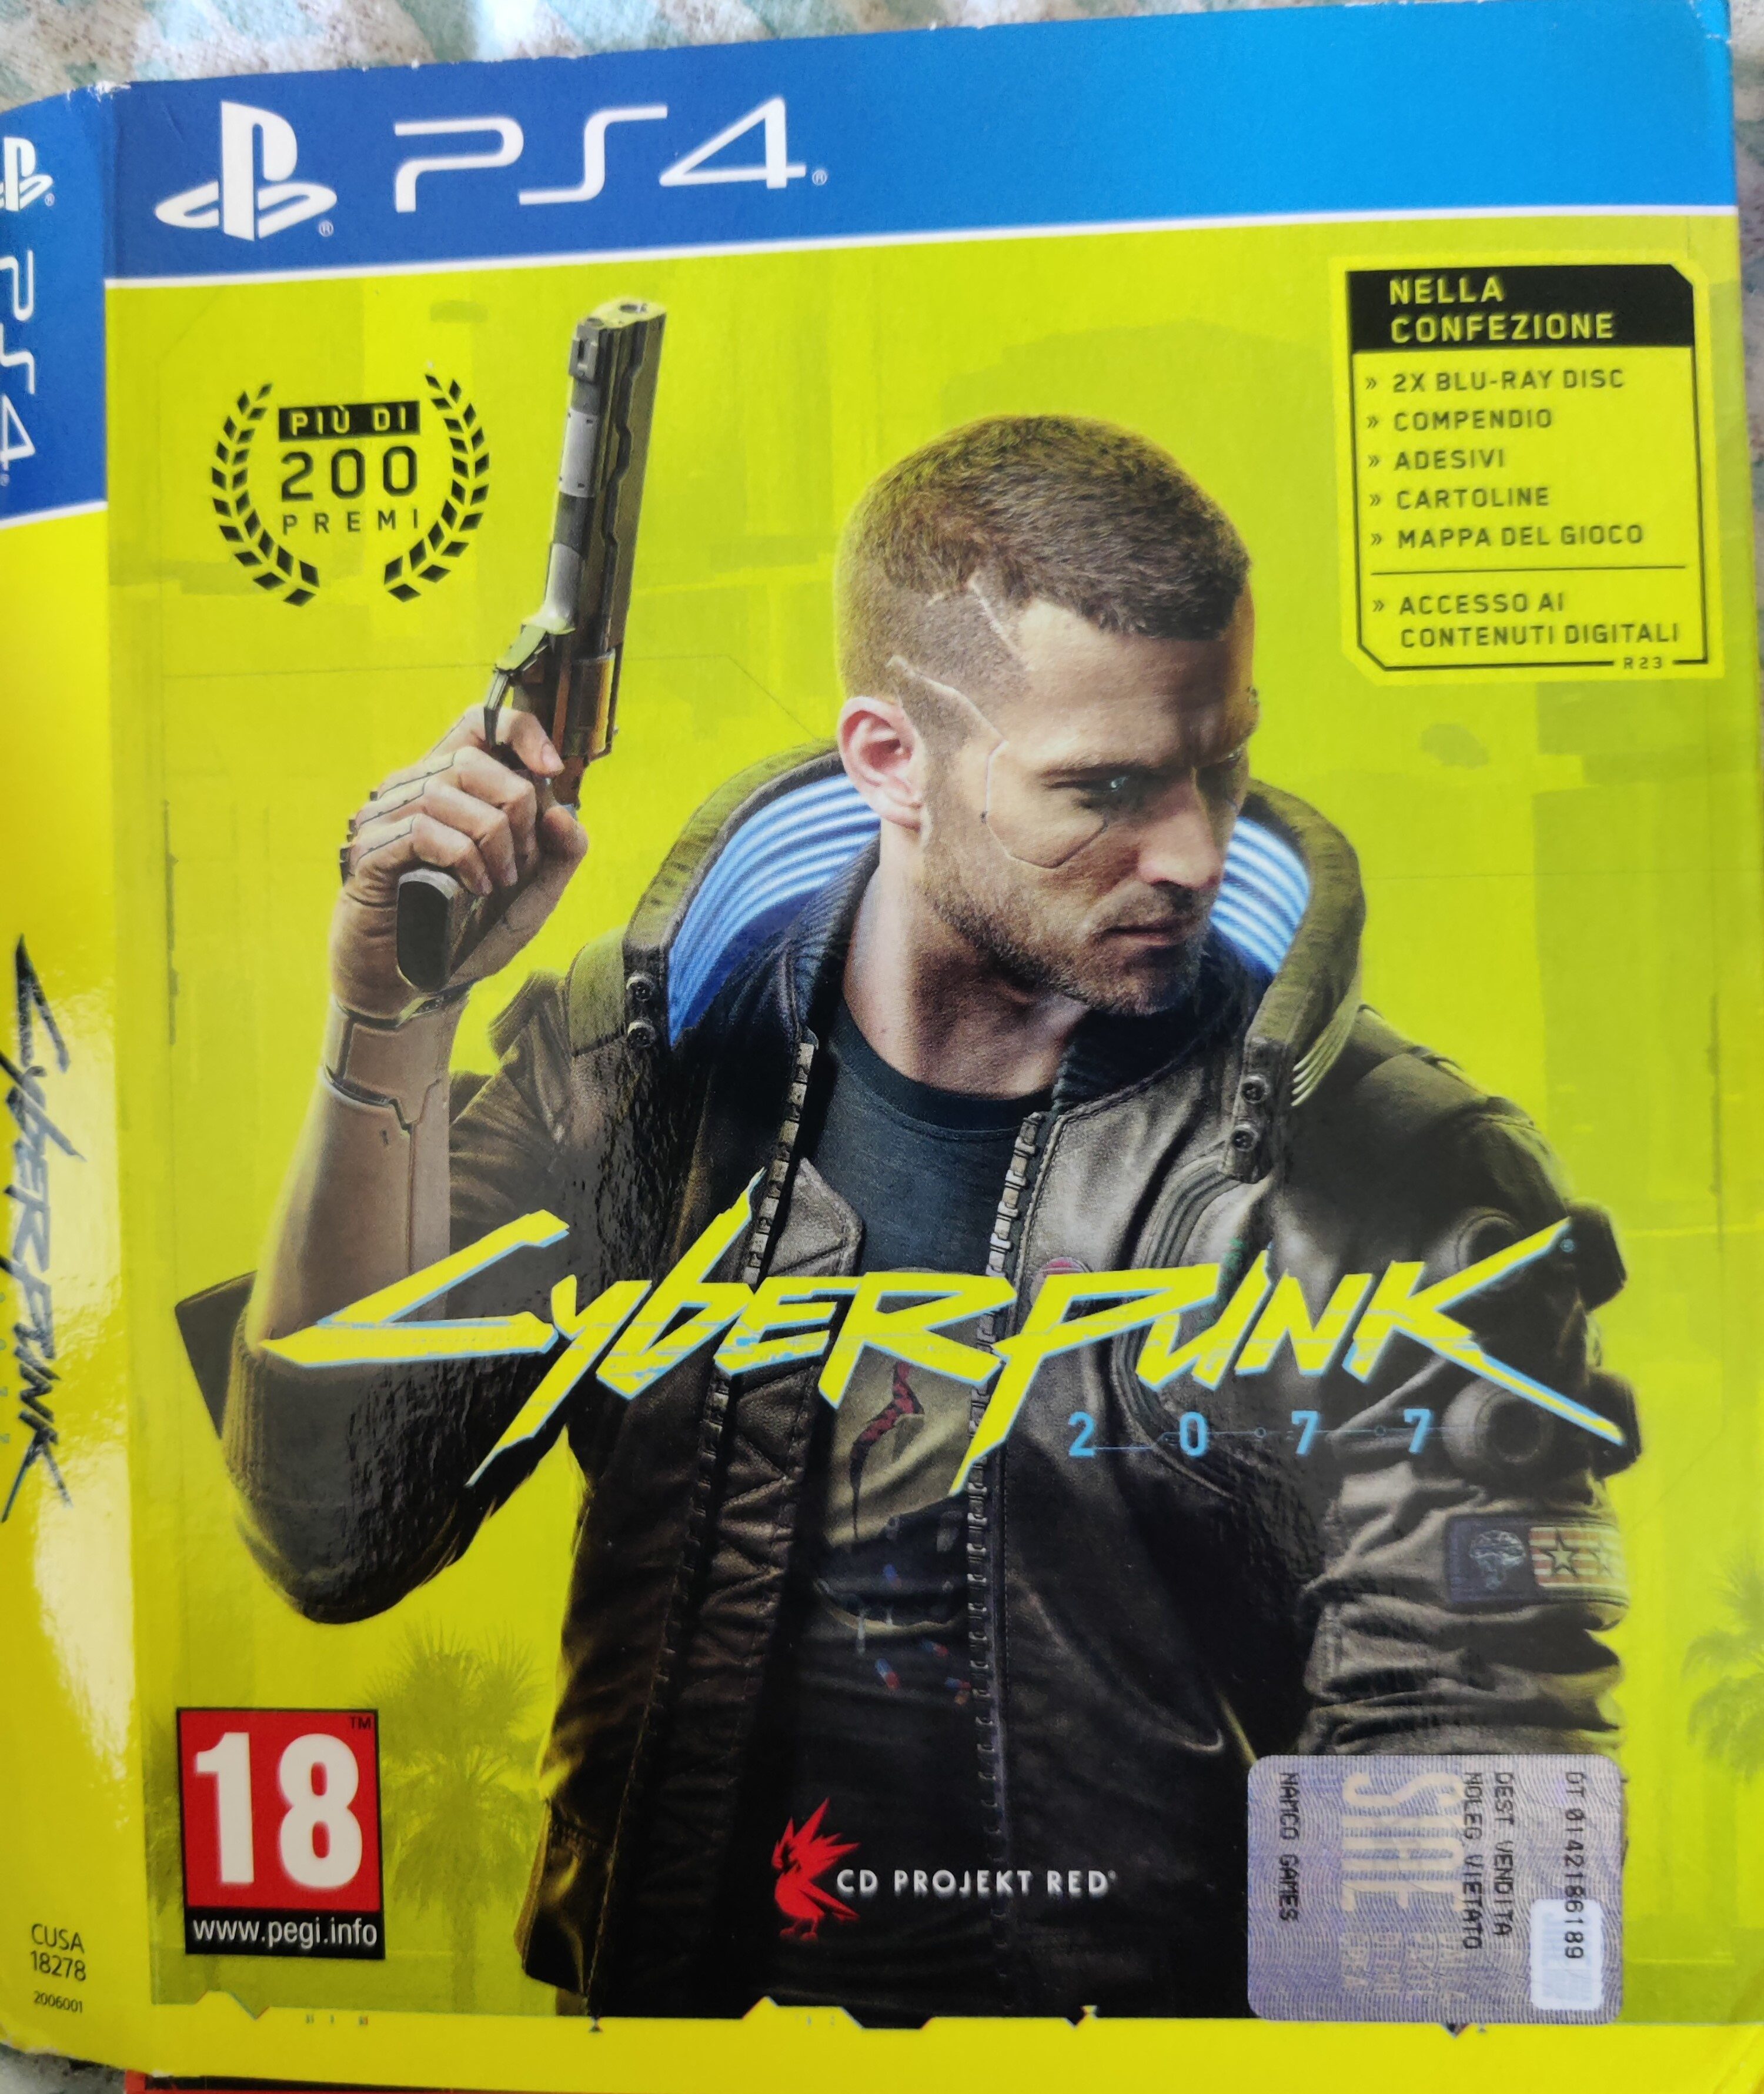 Cyberpunk 2077 (Day One Edition) PS4 - Product - it